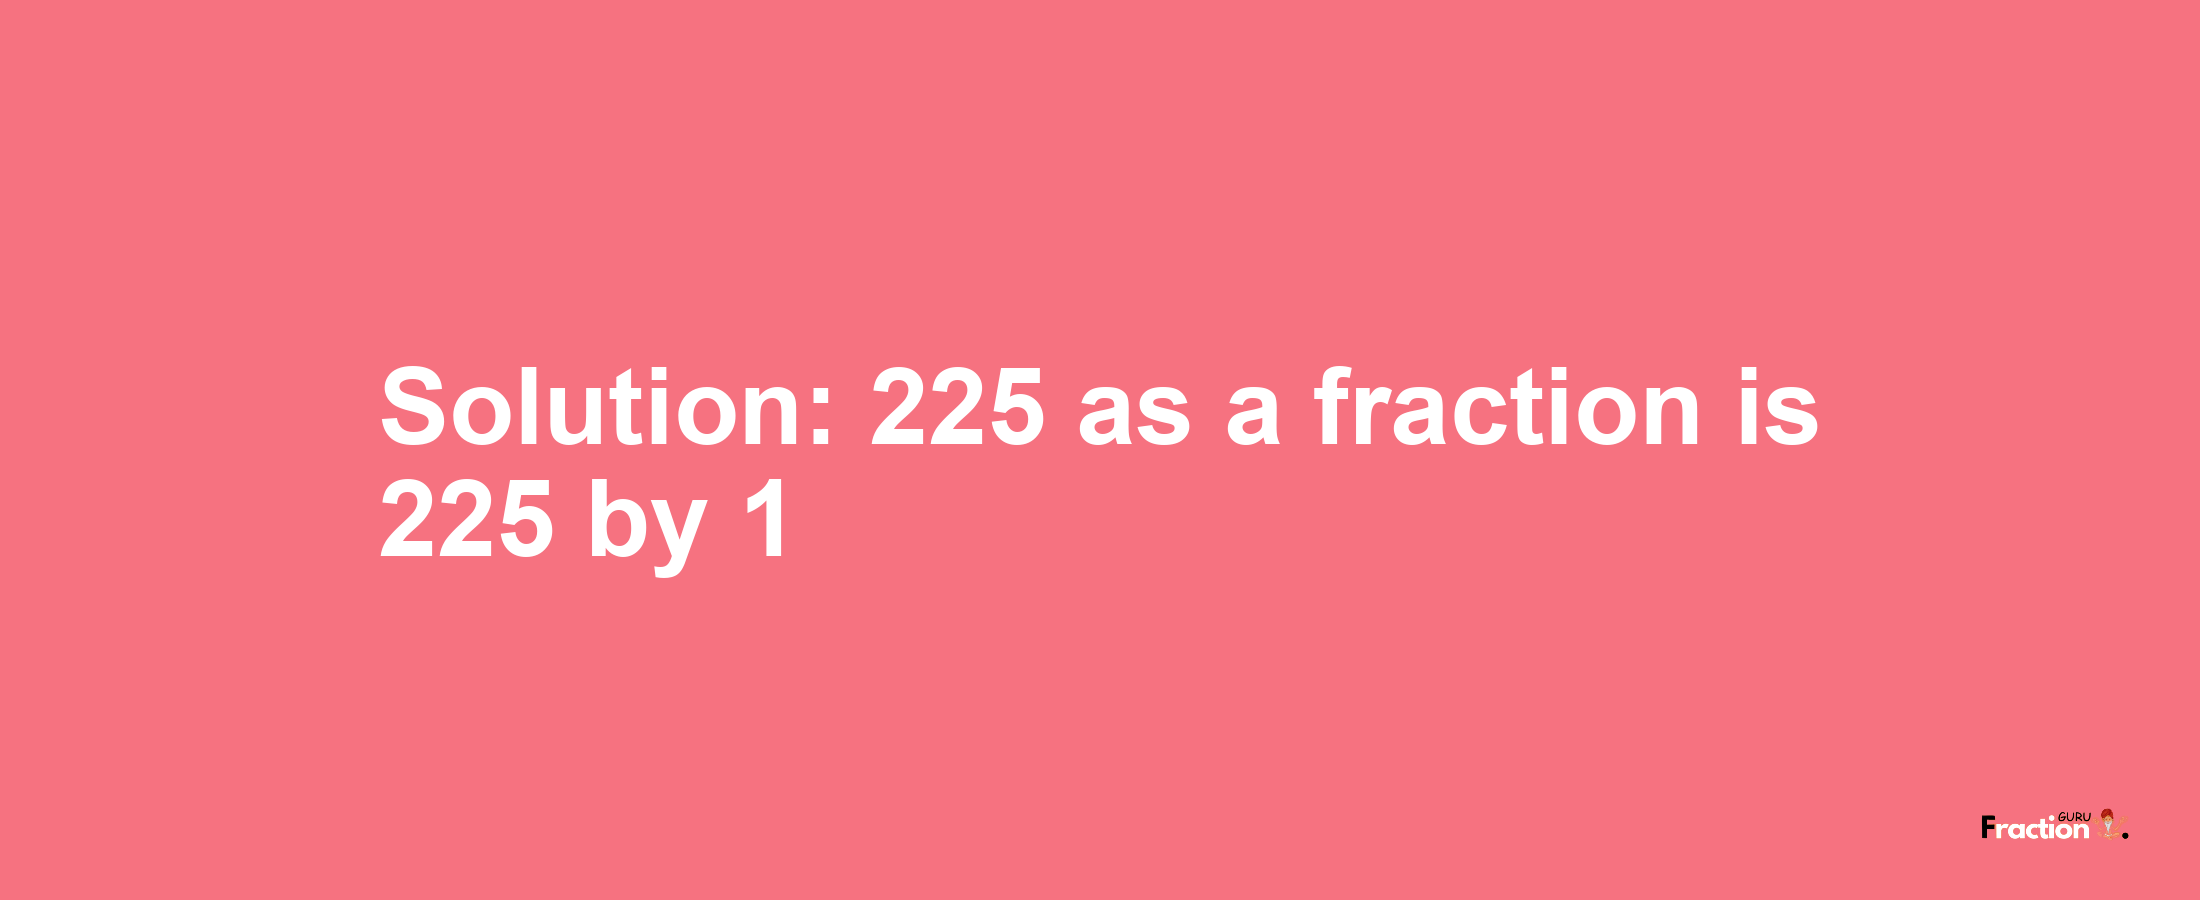 Solution:225 as a fraction is 225/1